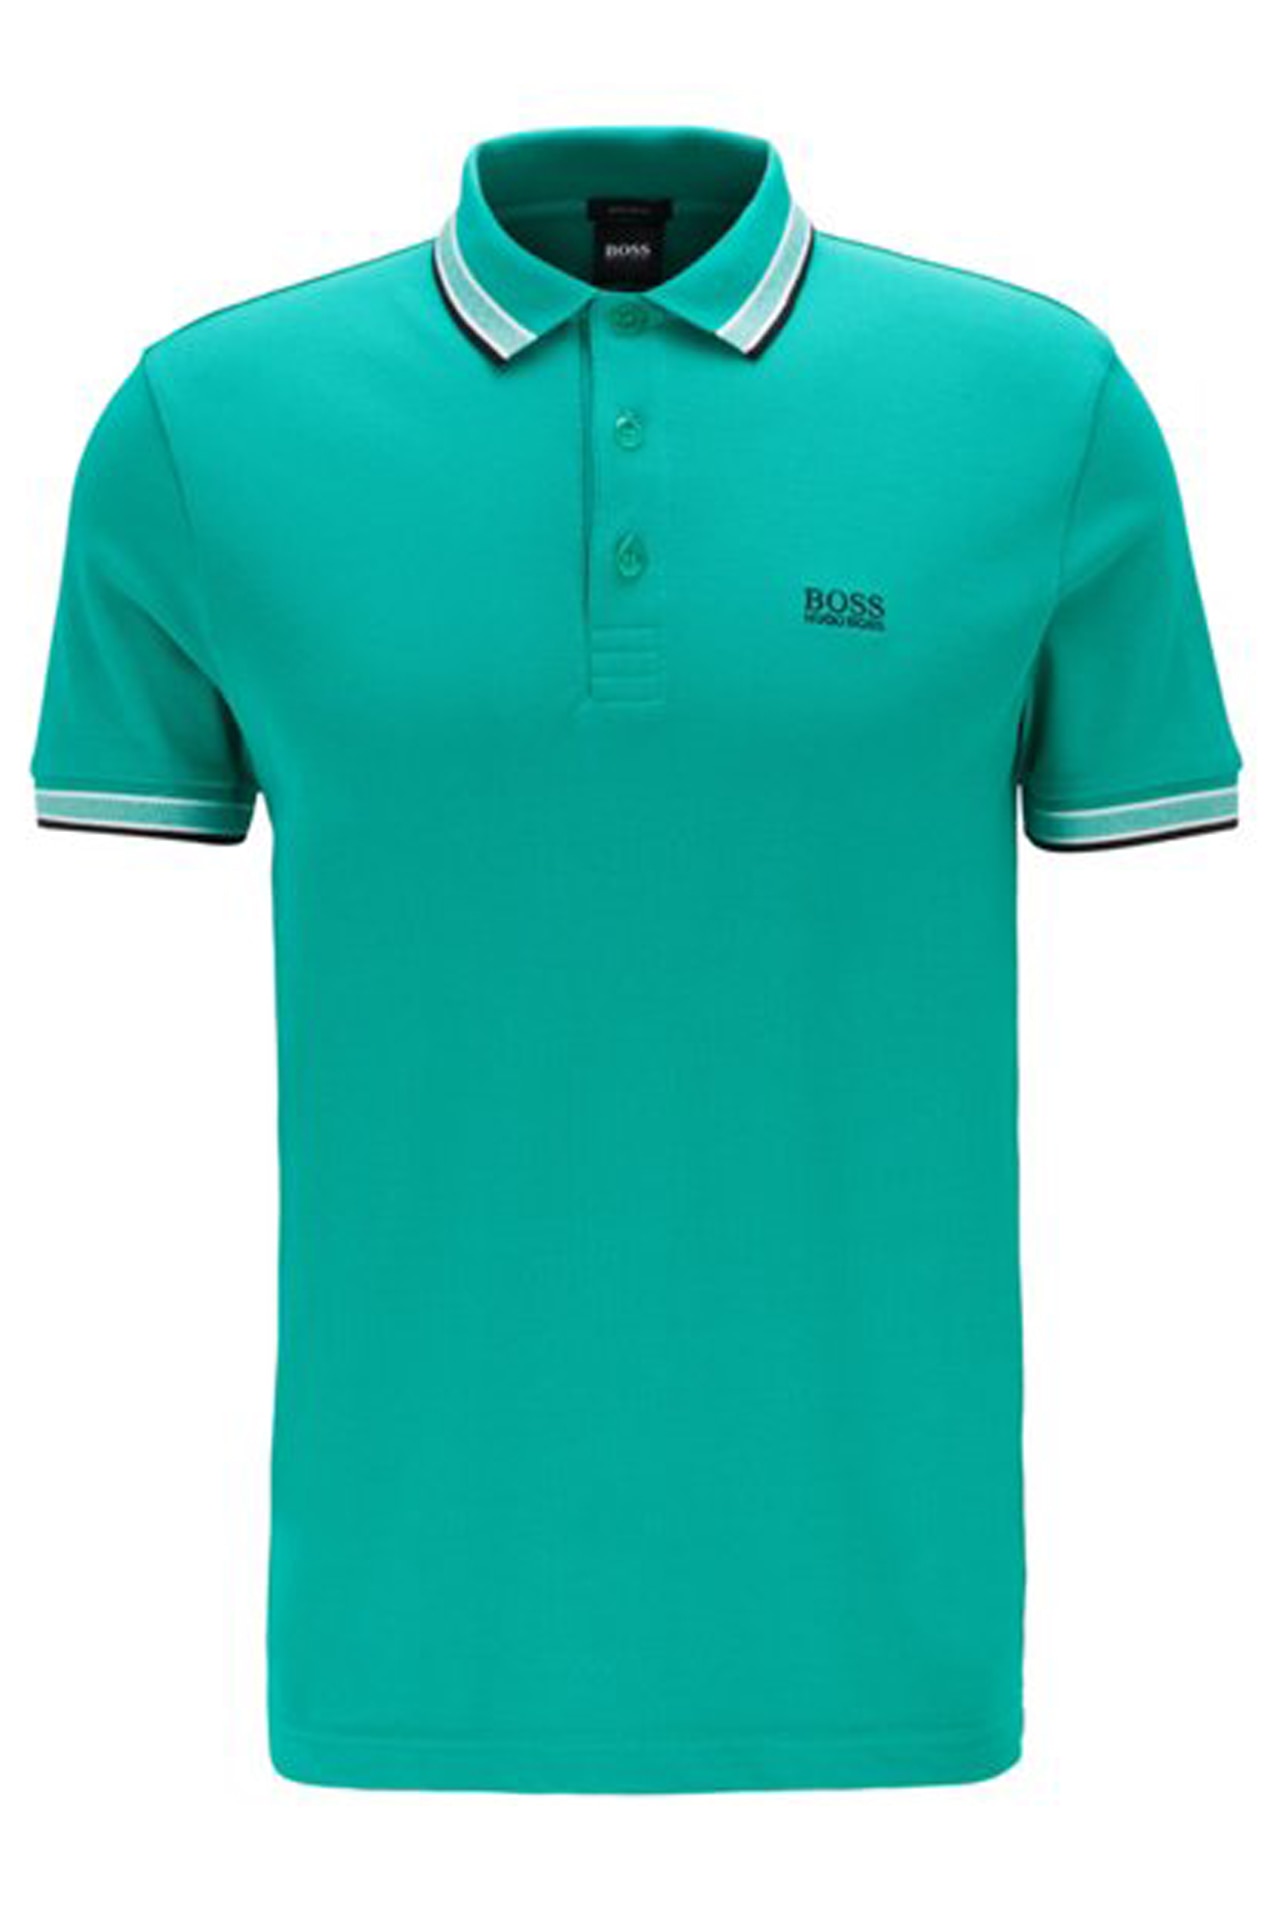 whistle Mathis chant Tricou Polo BOSS Athleisure cu logo in piept, Hugo Boss, verde, M EU -  eMAG.ro